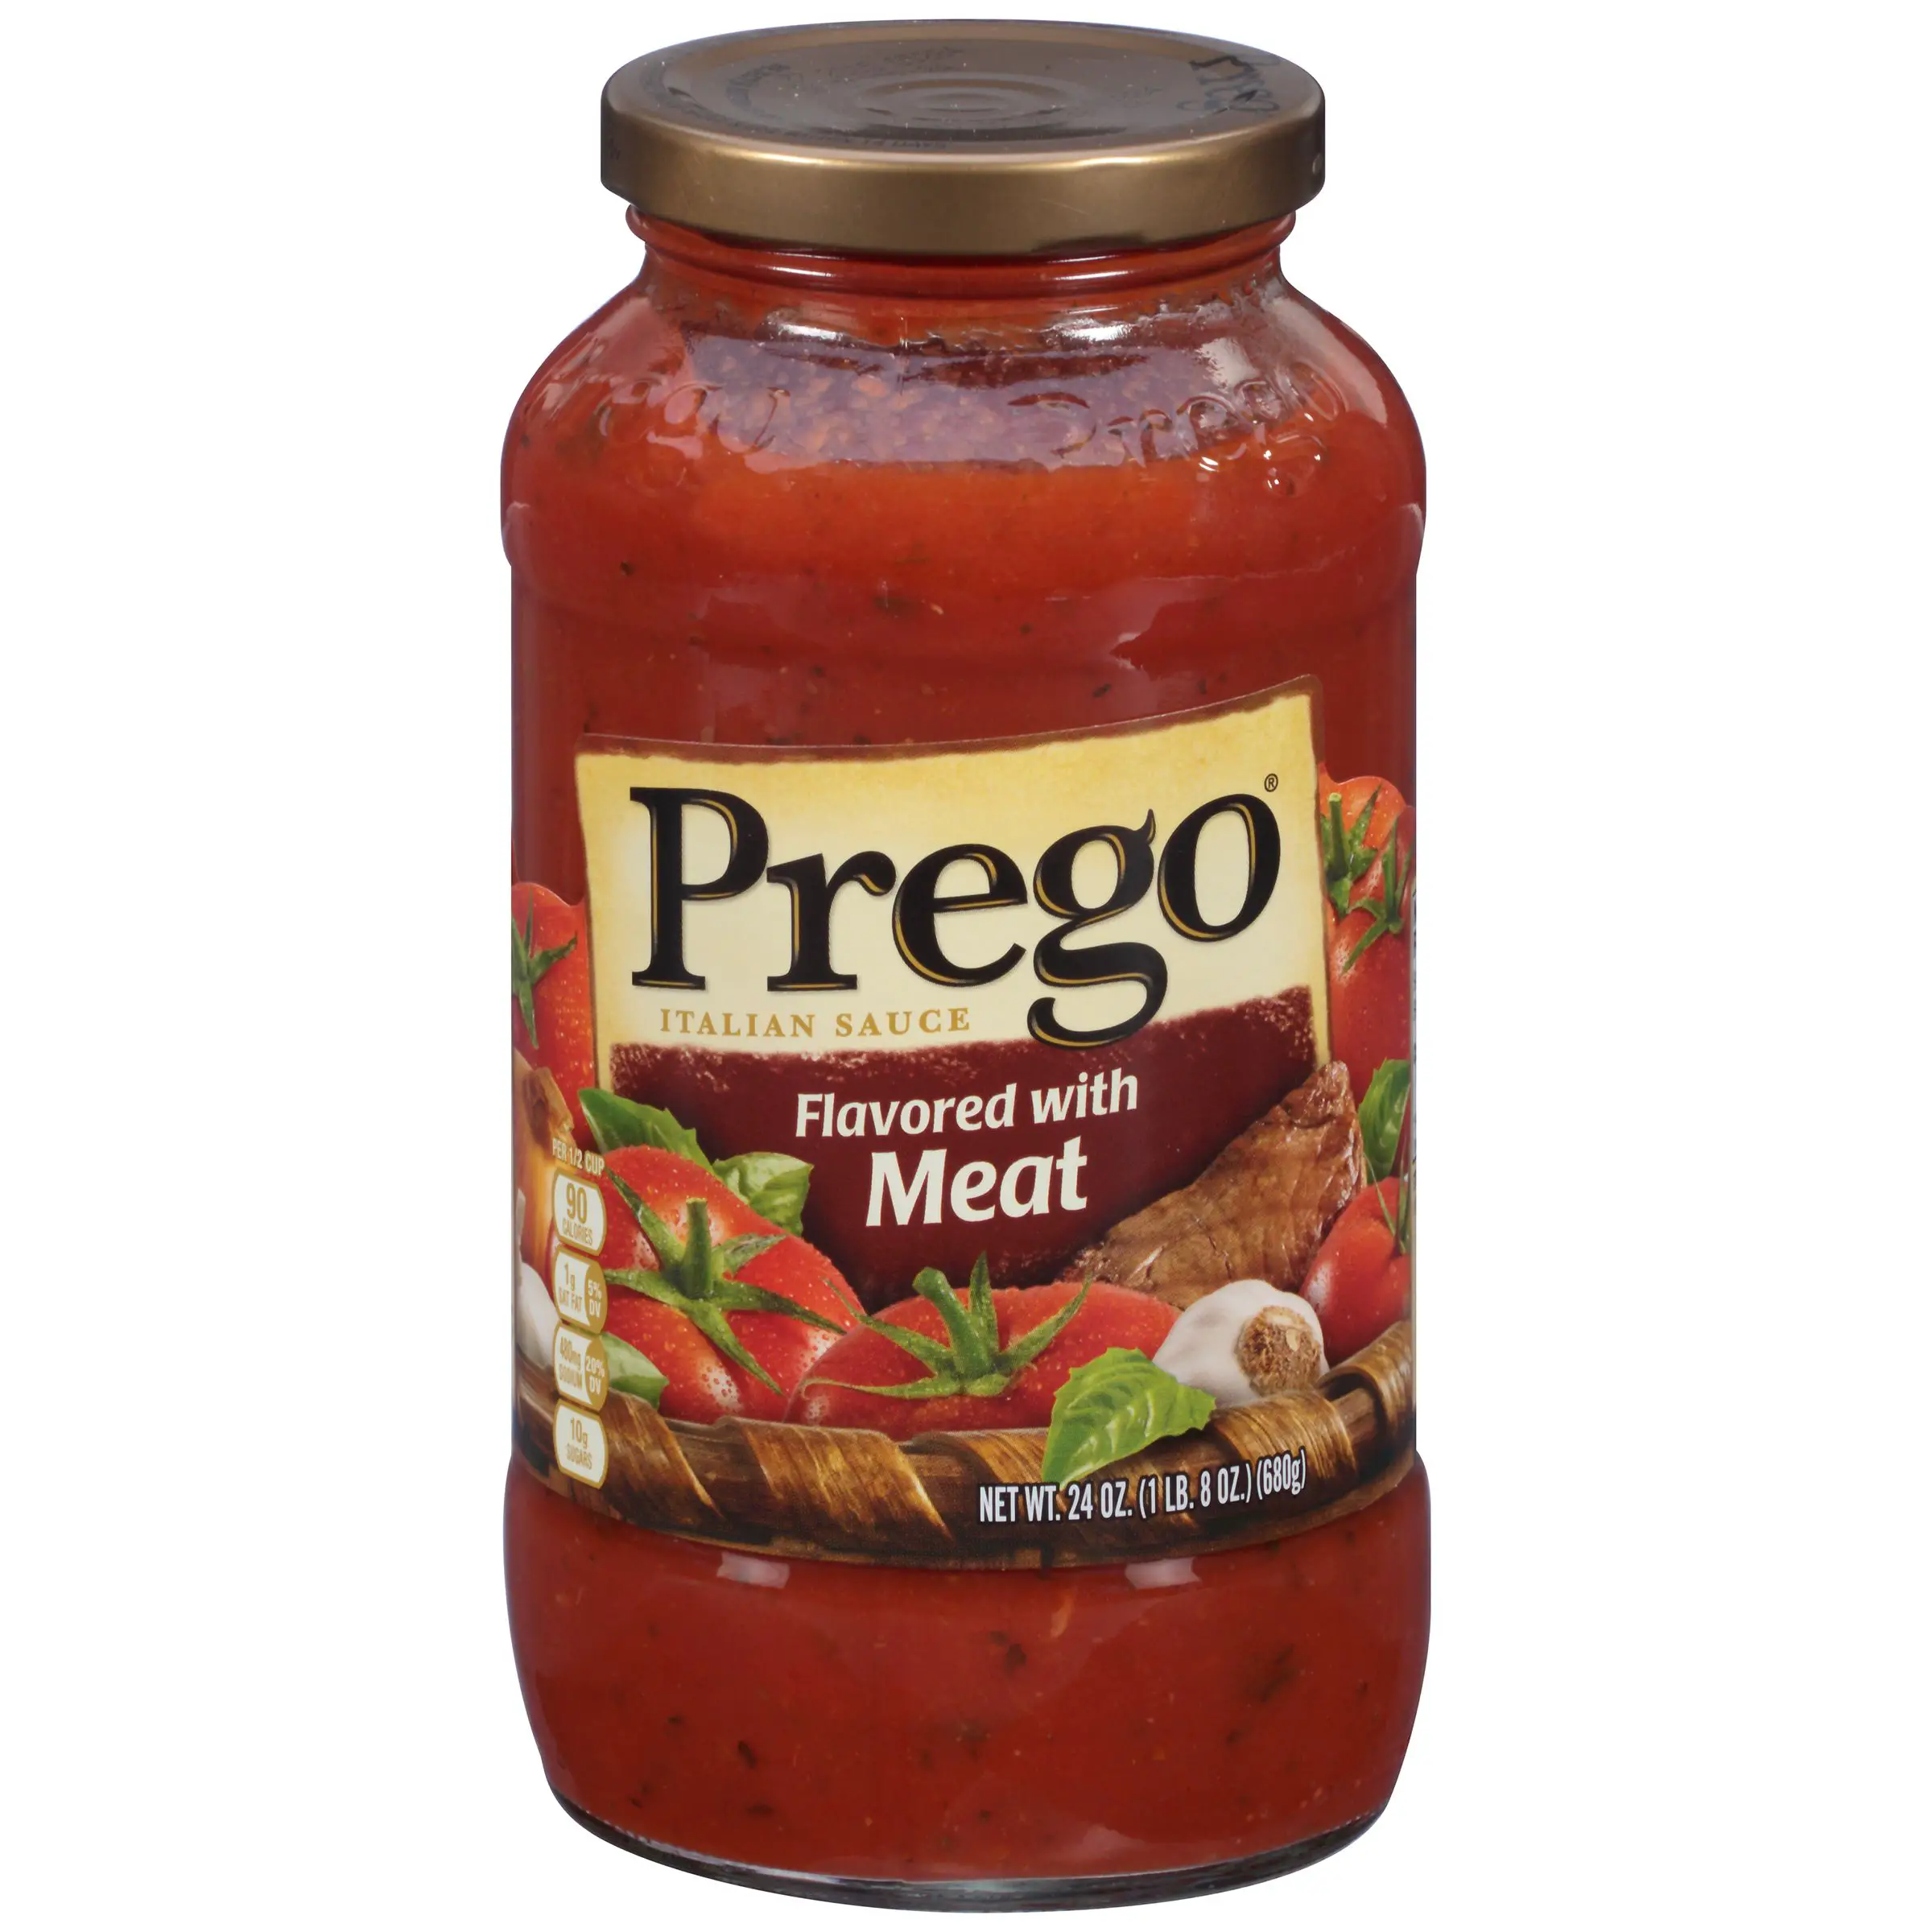 Prego Flavored with Meat Italian Sauce (With images)